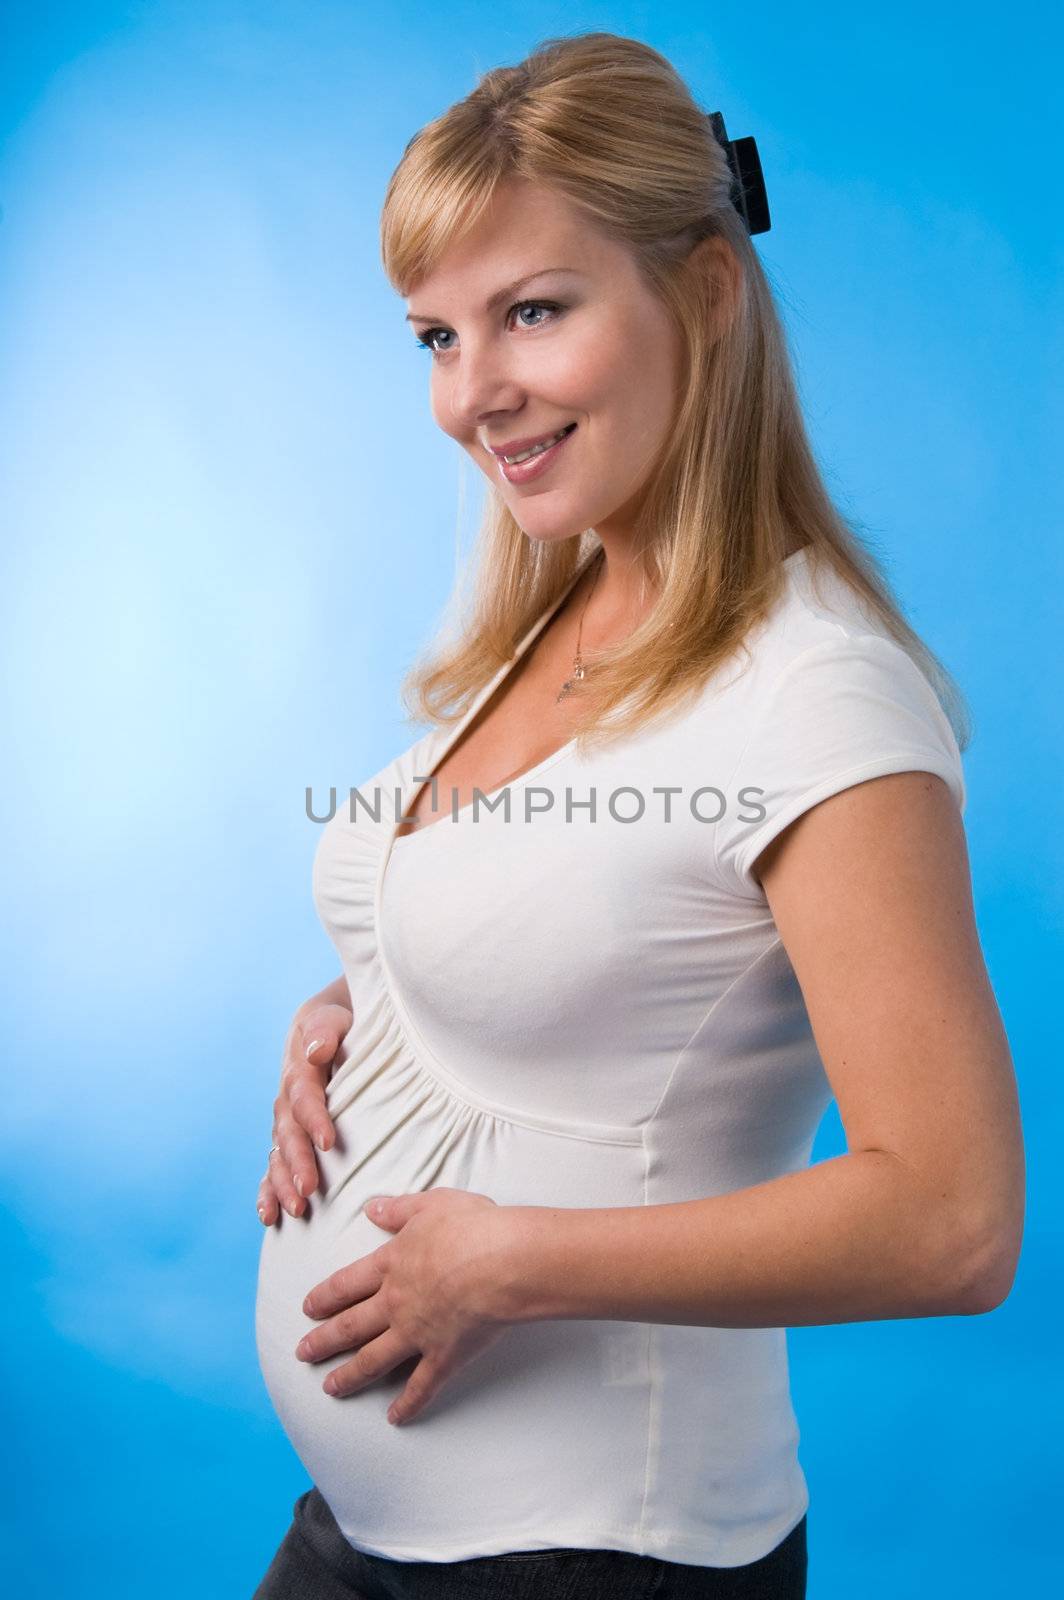 The fine pregnant woman supports hands a stomach.